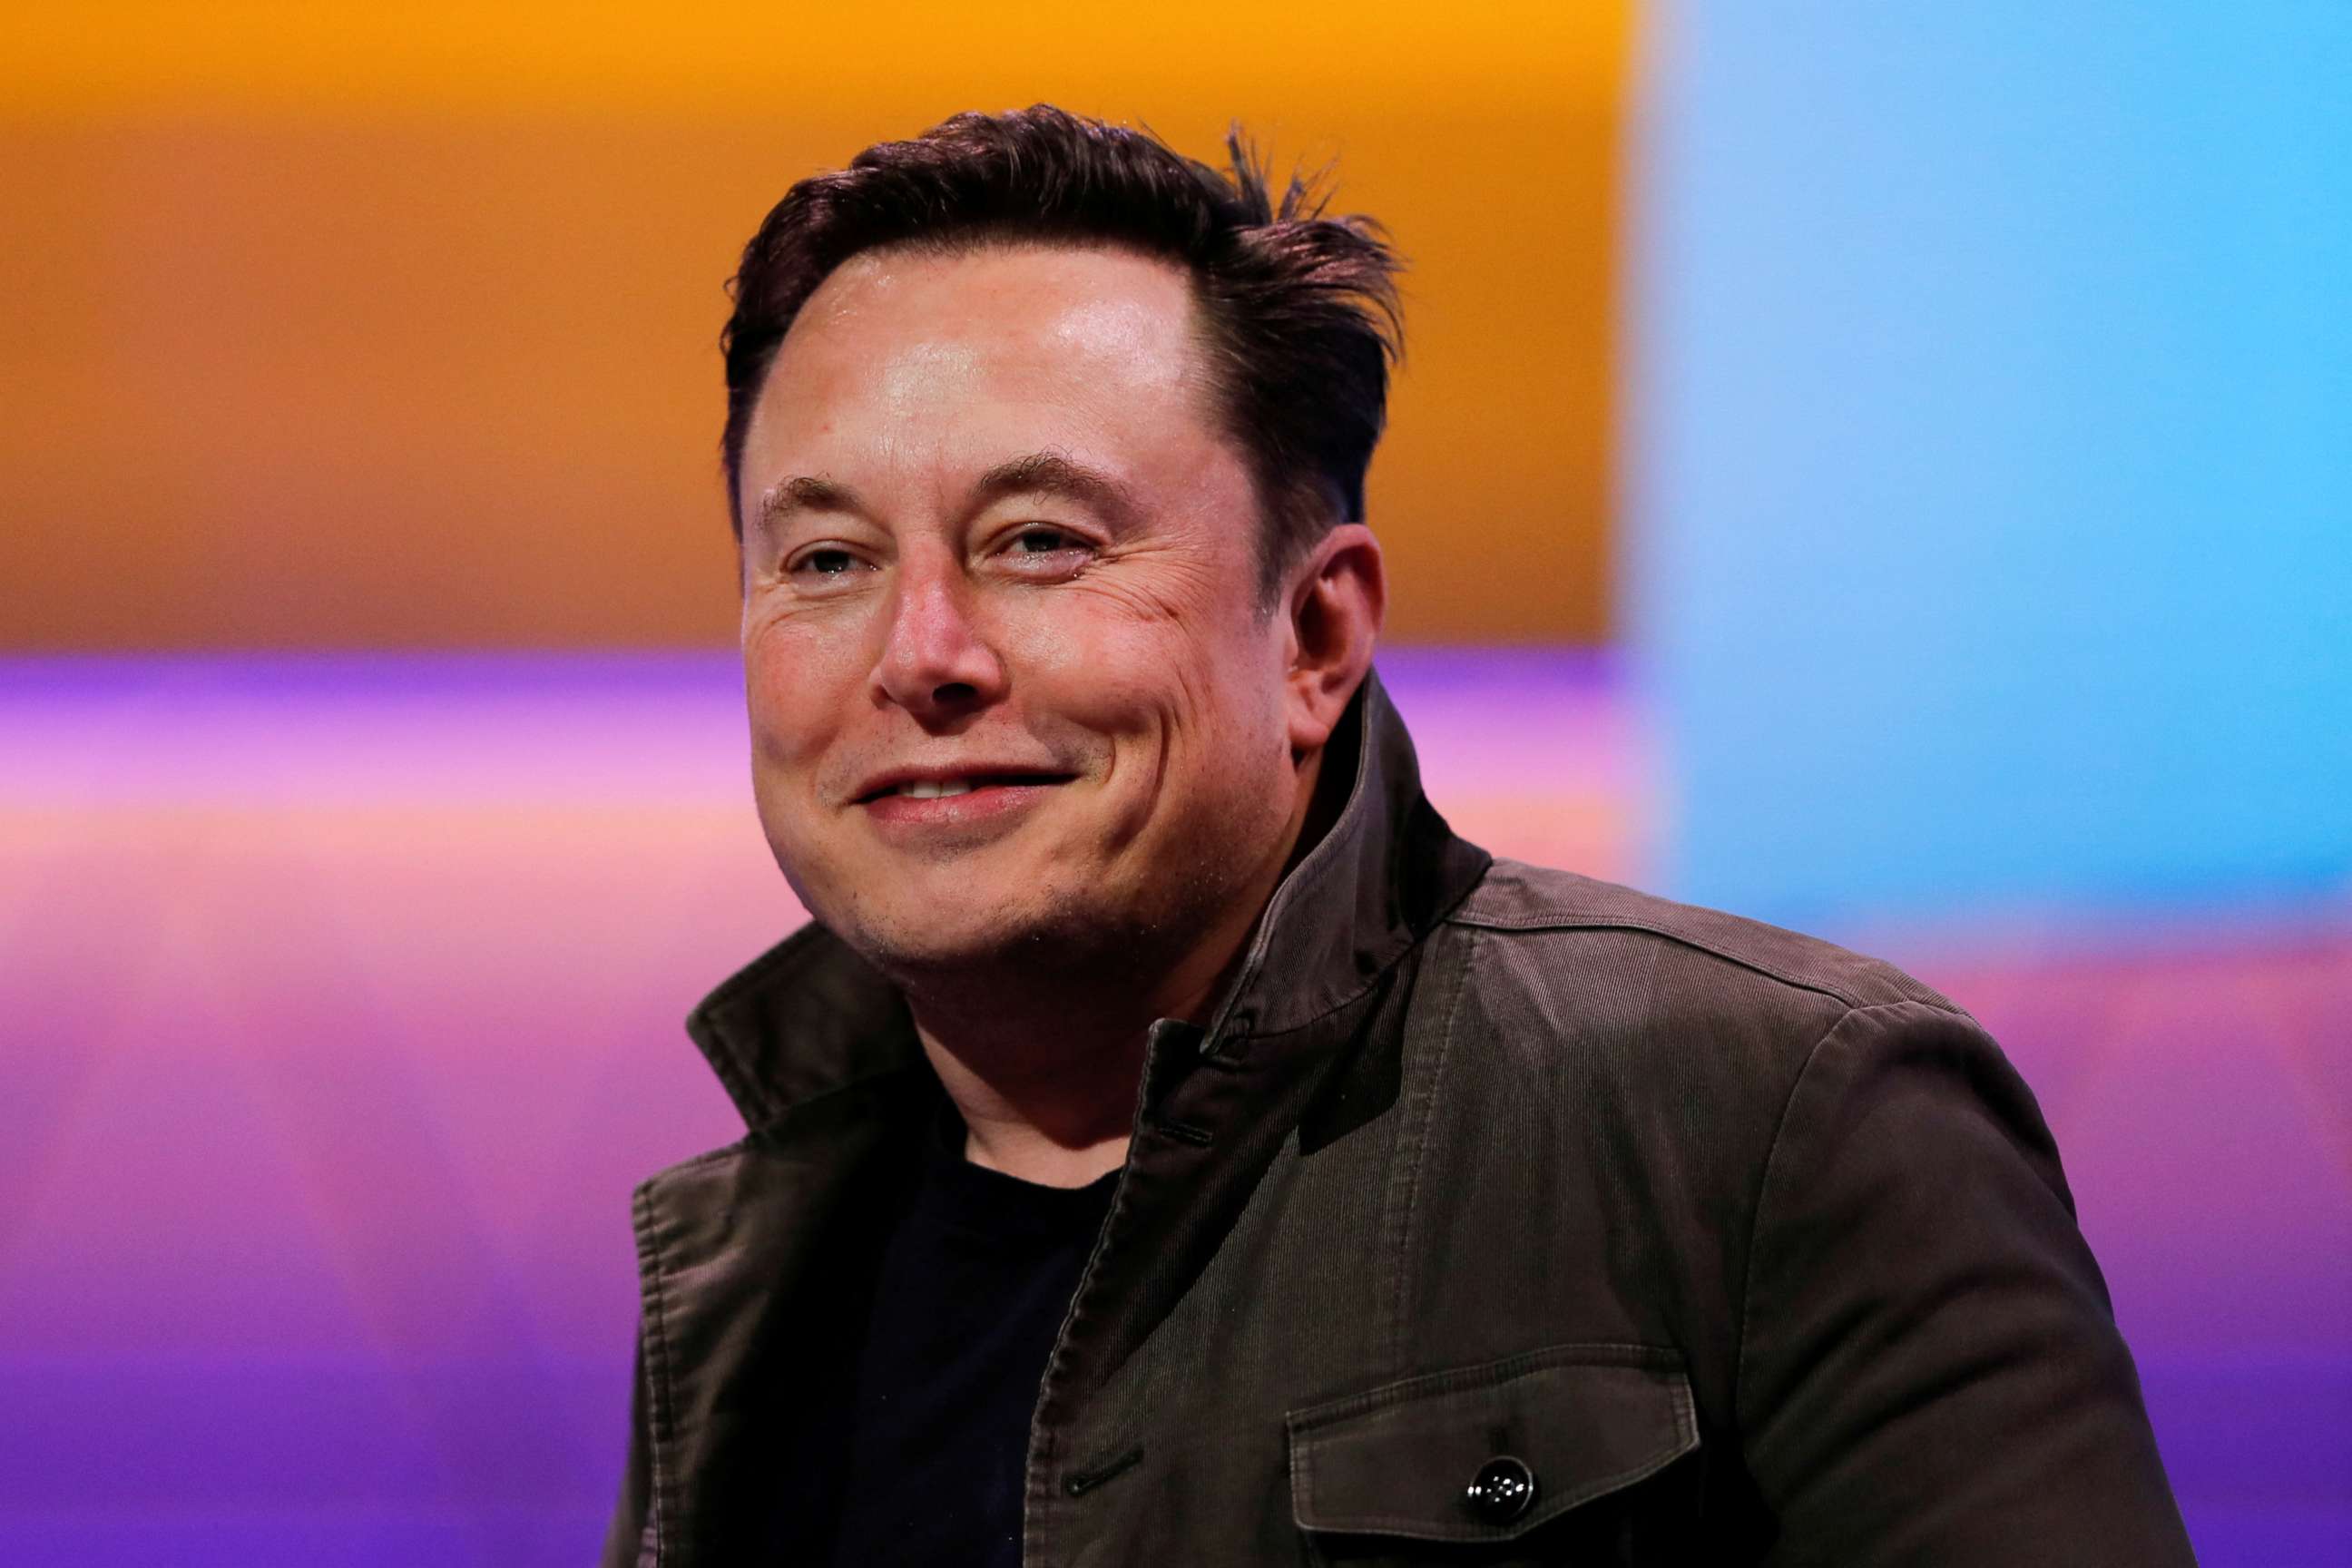 PHOTO: SpaceX owner and Tesla CEO Elon Musk smiles at the E3 gaming convention in Los Angeles, June 13, 2019.